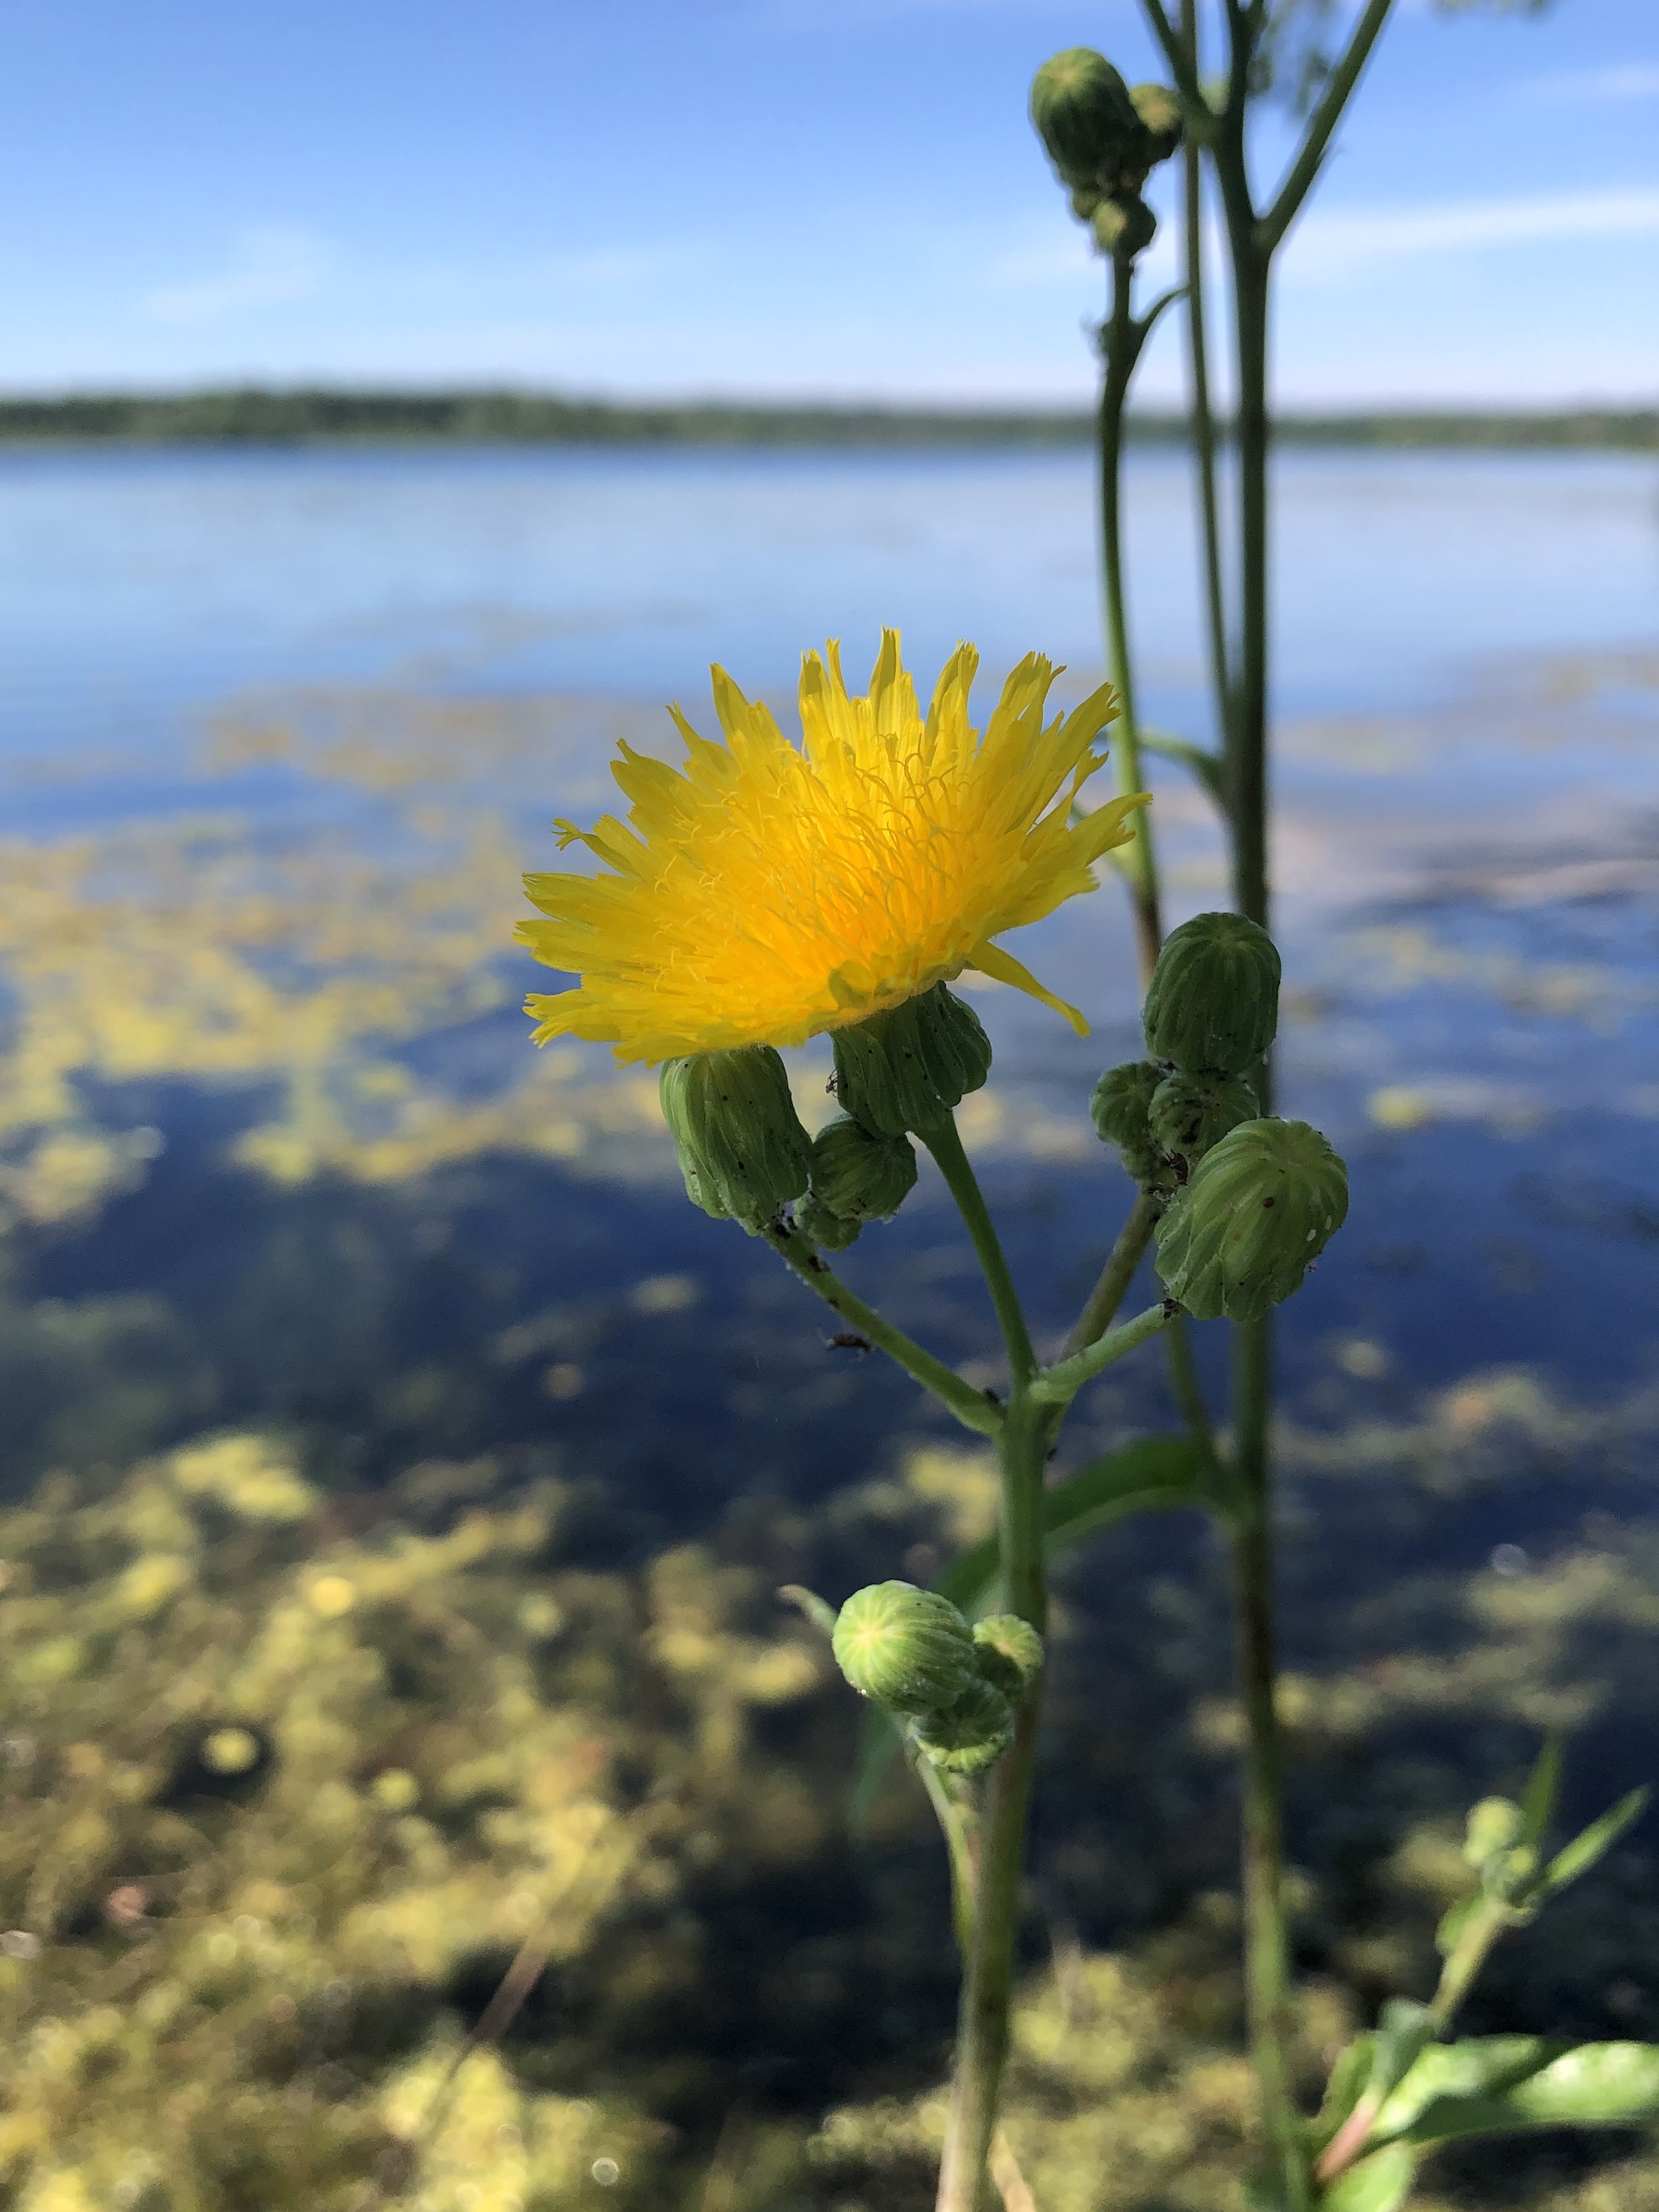 Perennial Sowthistle along shore of Lake Wingra on July 10, 2022.